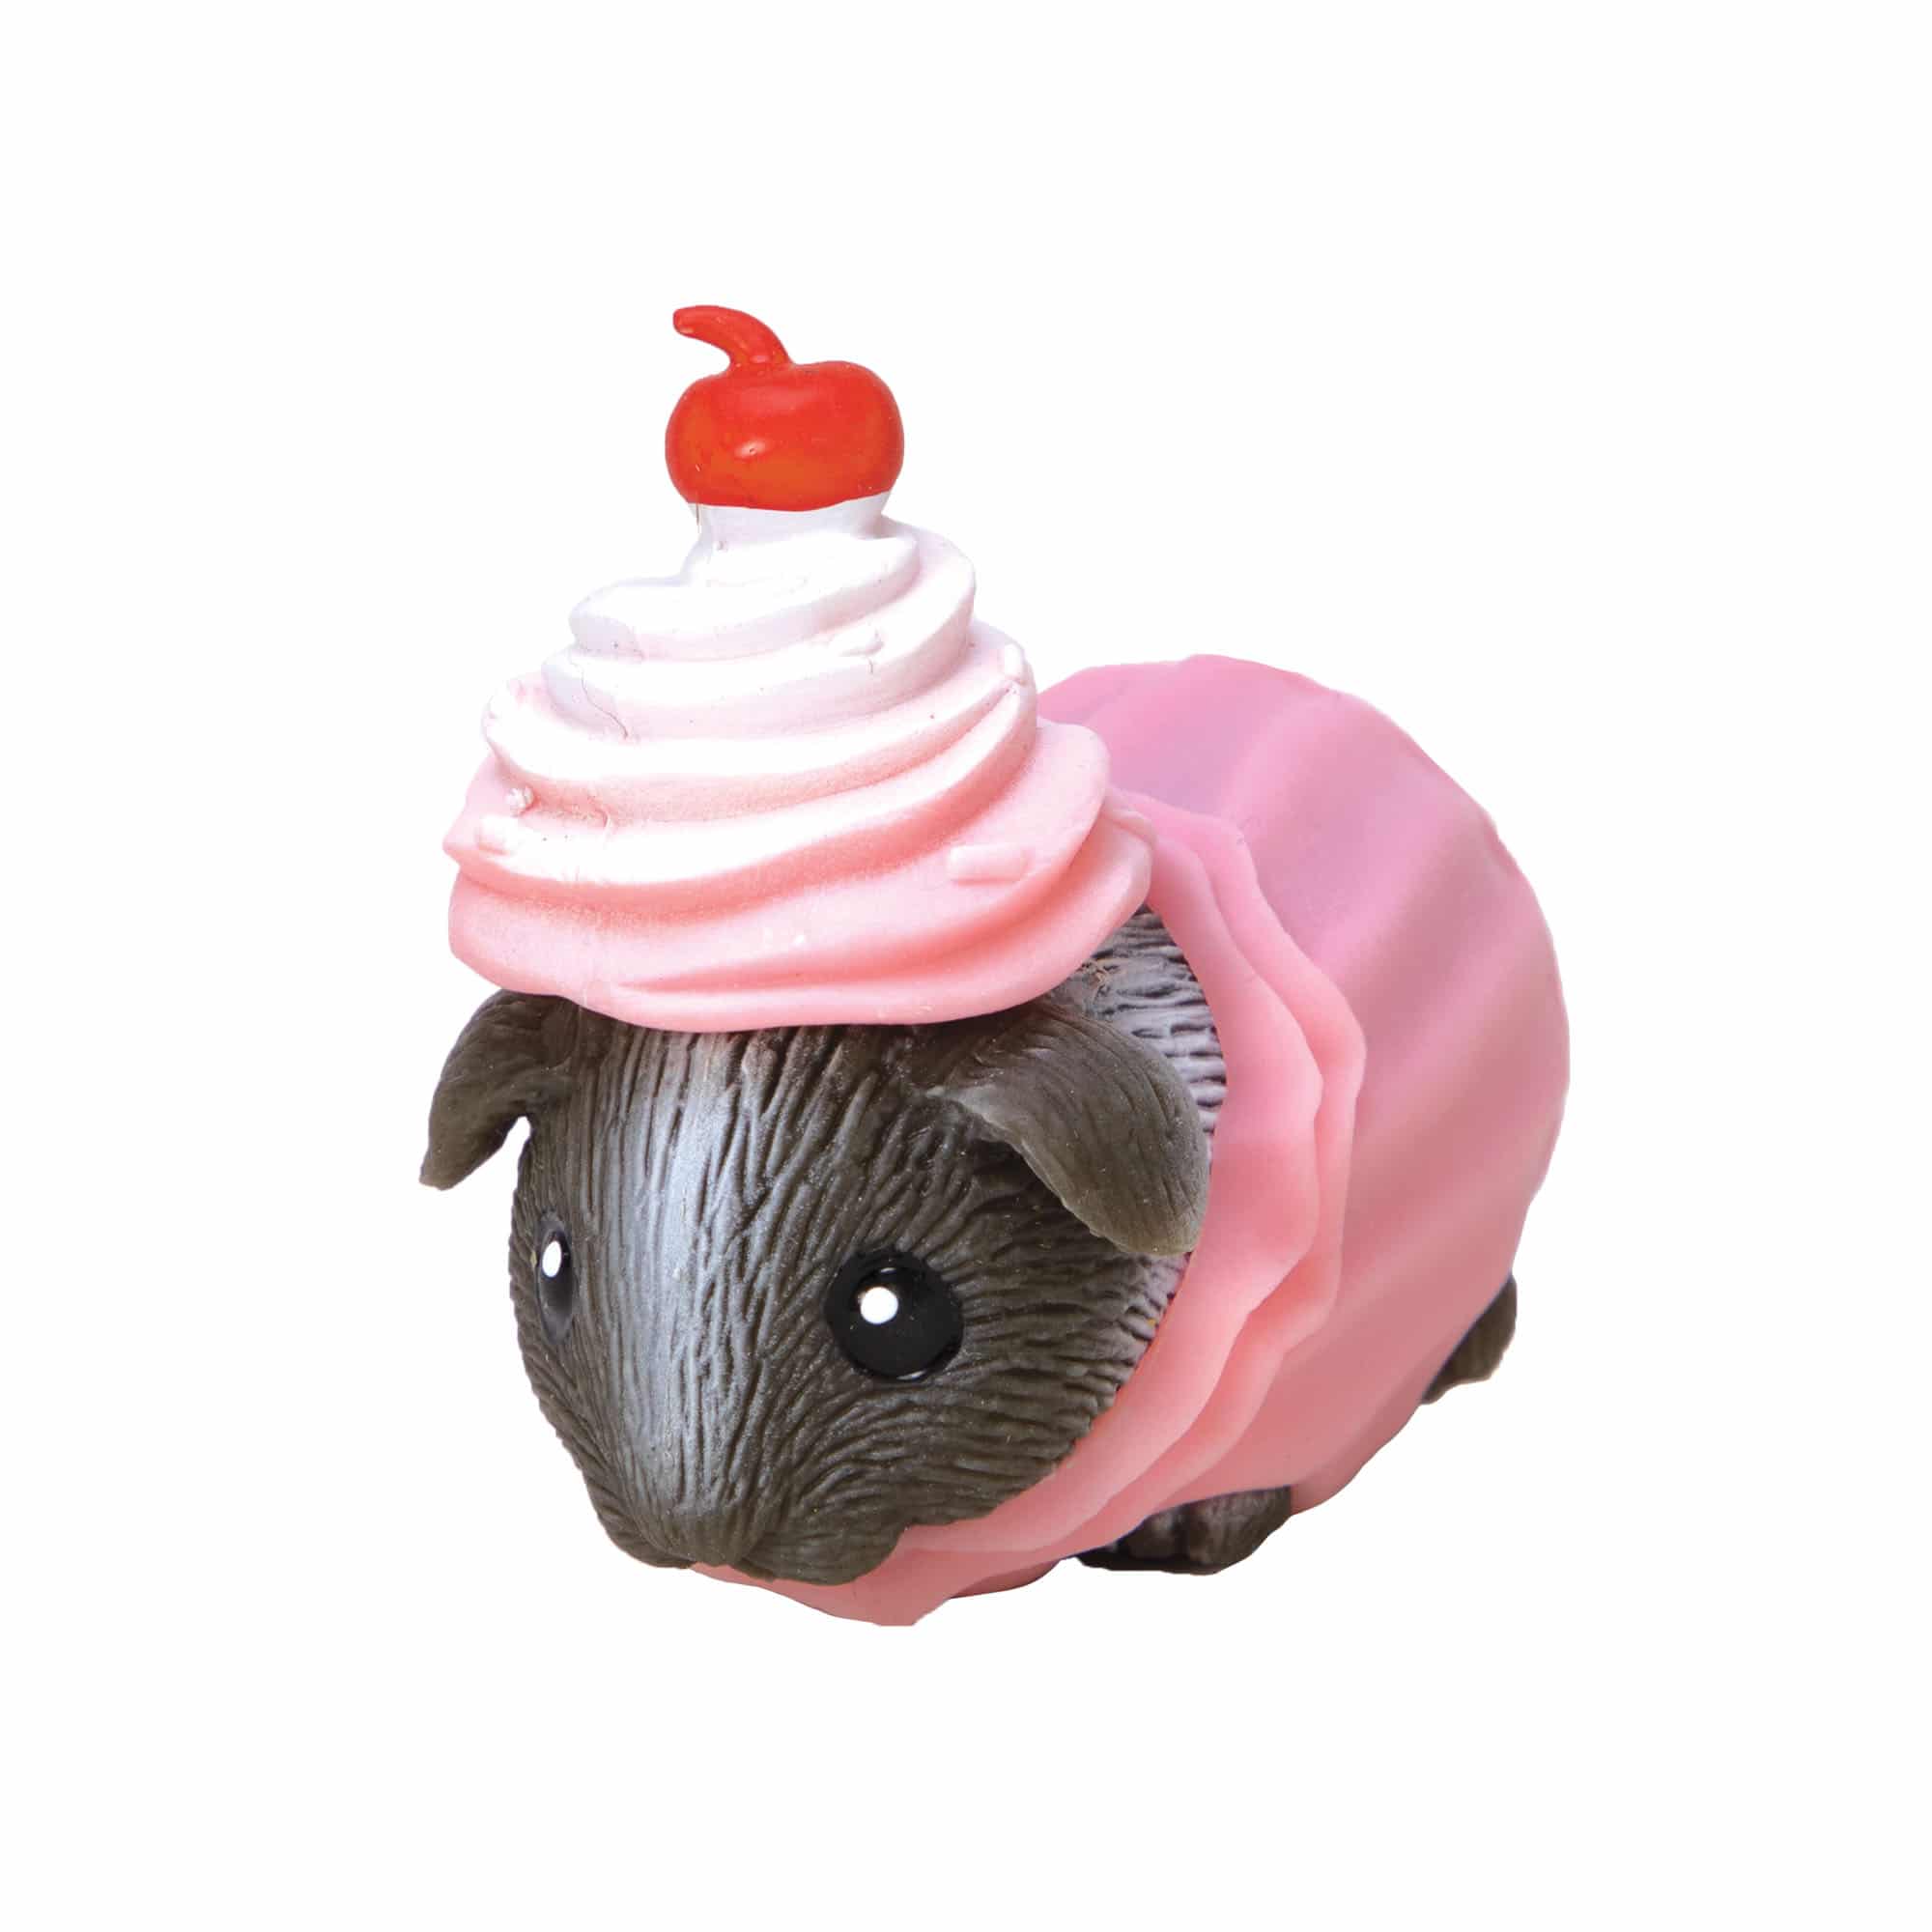 Party Animal Guinea Pigs (Single) - Assorted Outffits    